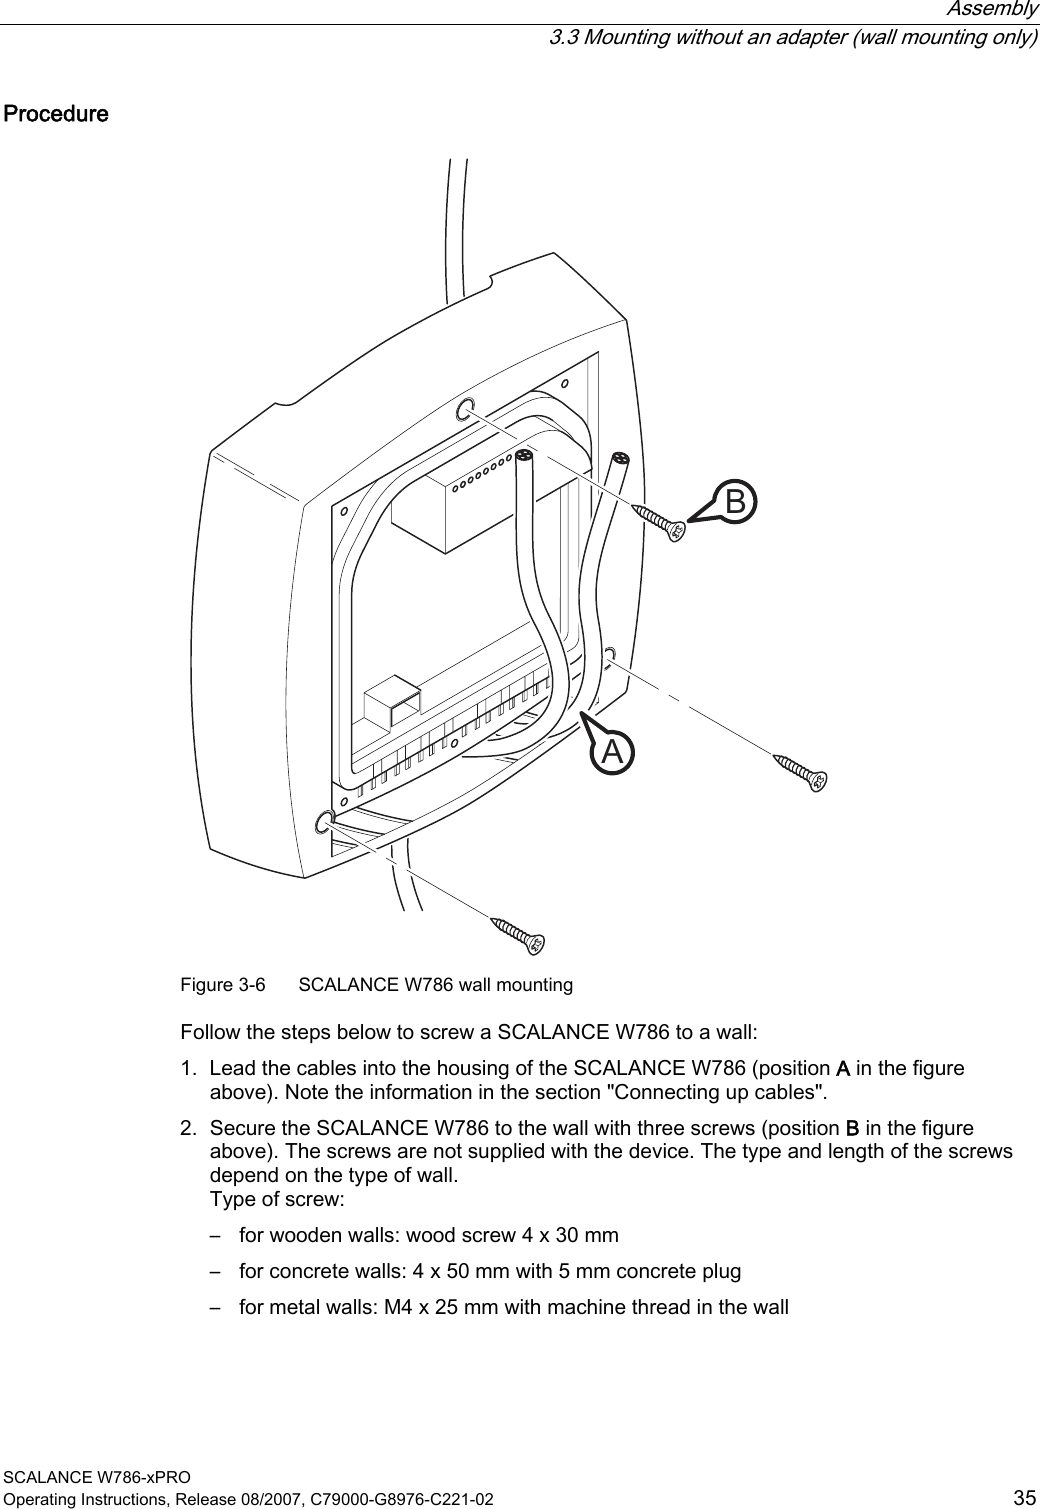  Assembly   3.3 Mounting without an adapter (wall mounting only) SCALANCE W786-xPRO Operating Instructions, Release 08/2007, C79000-G8976-C221-02  35 Procedure AB Figure 3-6  SCALANCE W786 wall mounting  Follow the steps below to screw a SCALANCE W786 to a wall: 1. Lead the cables into the housing of the SCALANCE W786 (position A in the figure above). Note the information in the section &quot;Connecting up cables&quot;. 2. Secure the SCALANCE W786 to the wall with three screws (position B in the figure above). The screws are not supplied with the device. The type and length of the screws depend on the type of wall. Type of screw: – for wooden walls: wood screw 4 x 30 mm – for concrete walls: 4 x 50 mm with 5 mm concrete plug – for metal walls: M4 x 25 mm with machine thread in the wall 